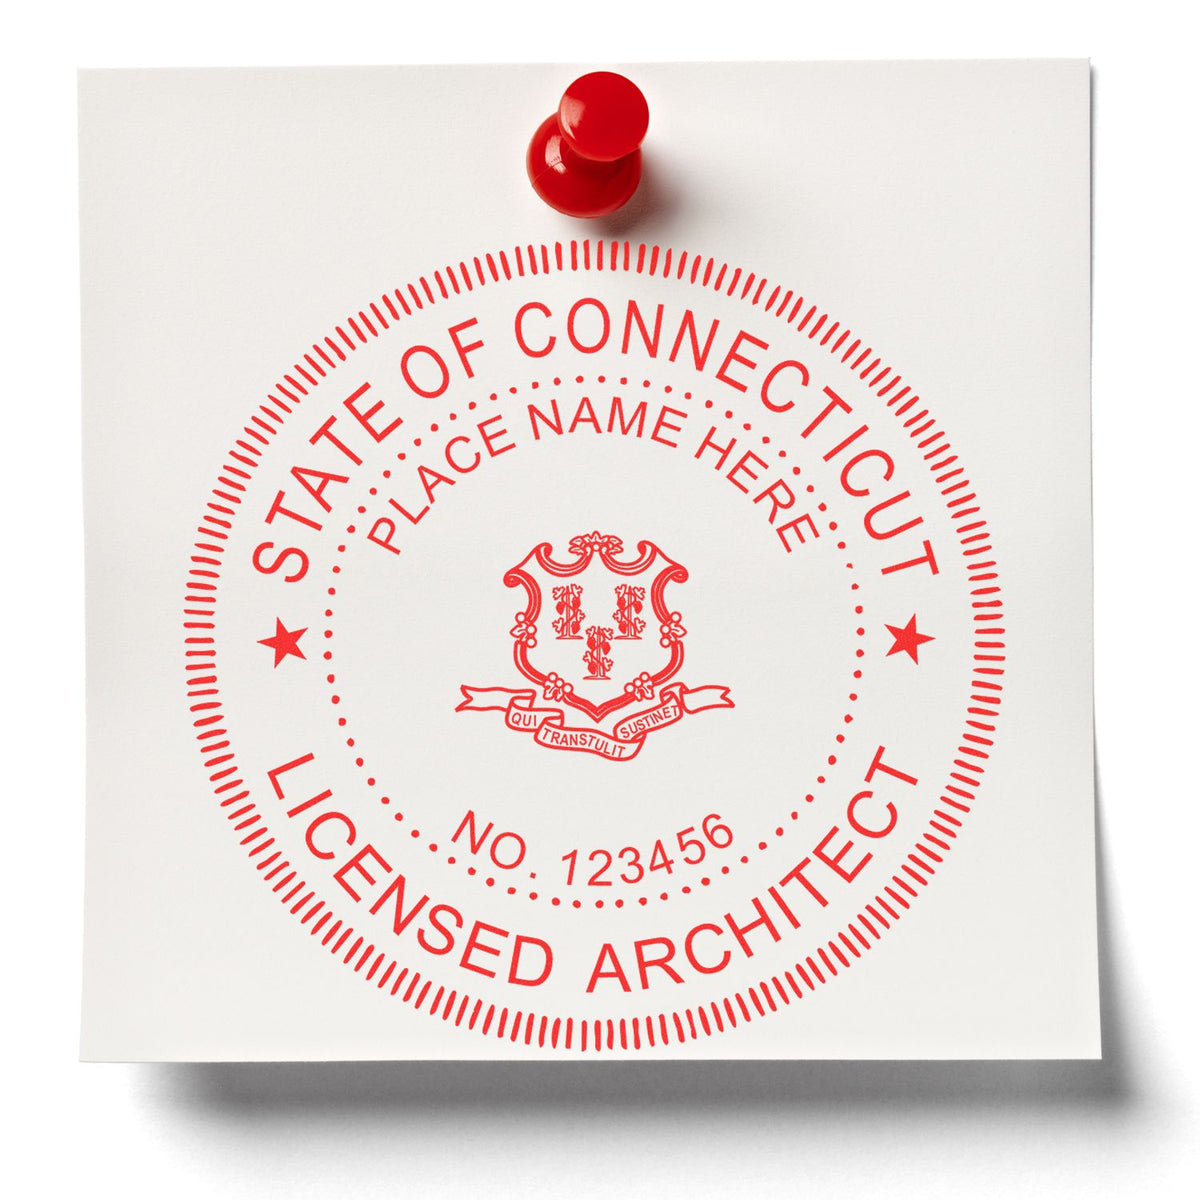 Slim Pre-Inked Connecticut Architect Seal Stamp in use photo showing a stamped imprint of the Slim Pre-Inked Connecticut Architect Seal Stamp